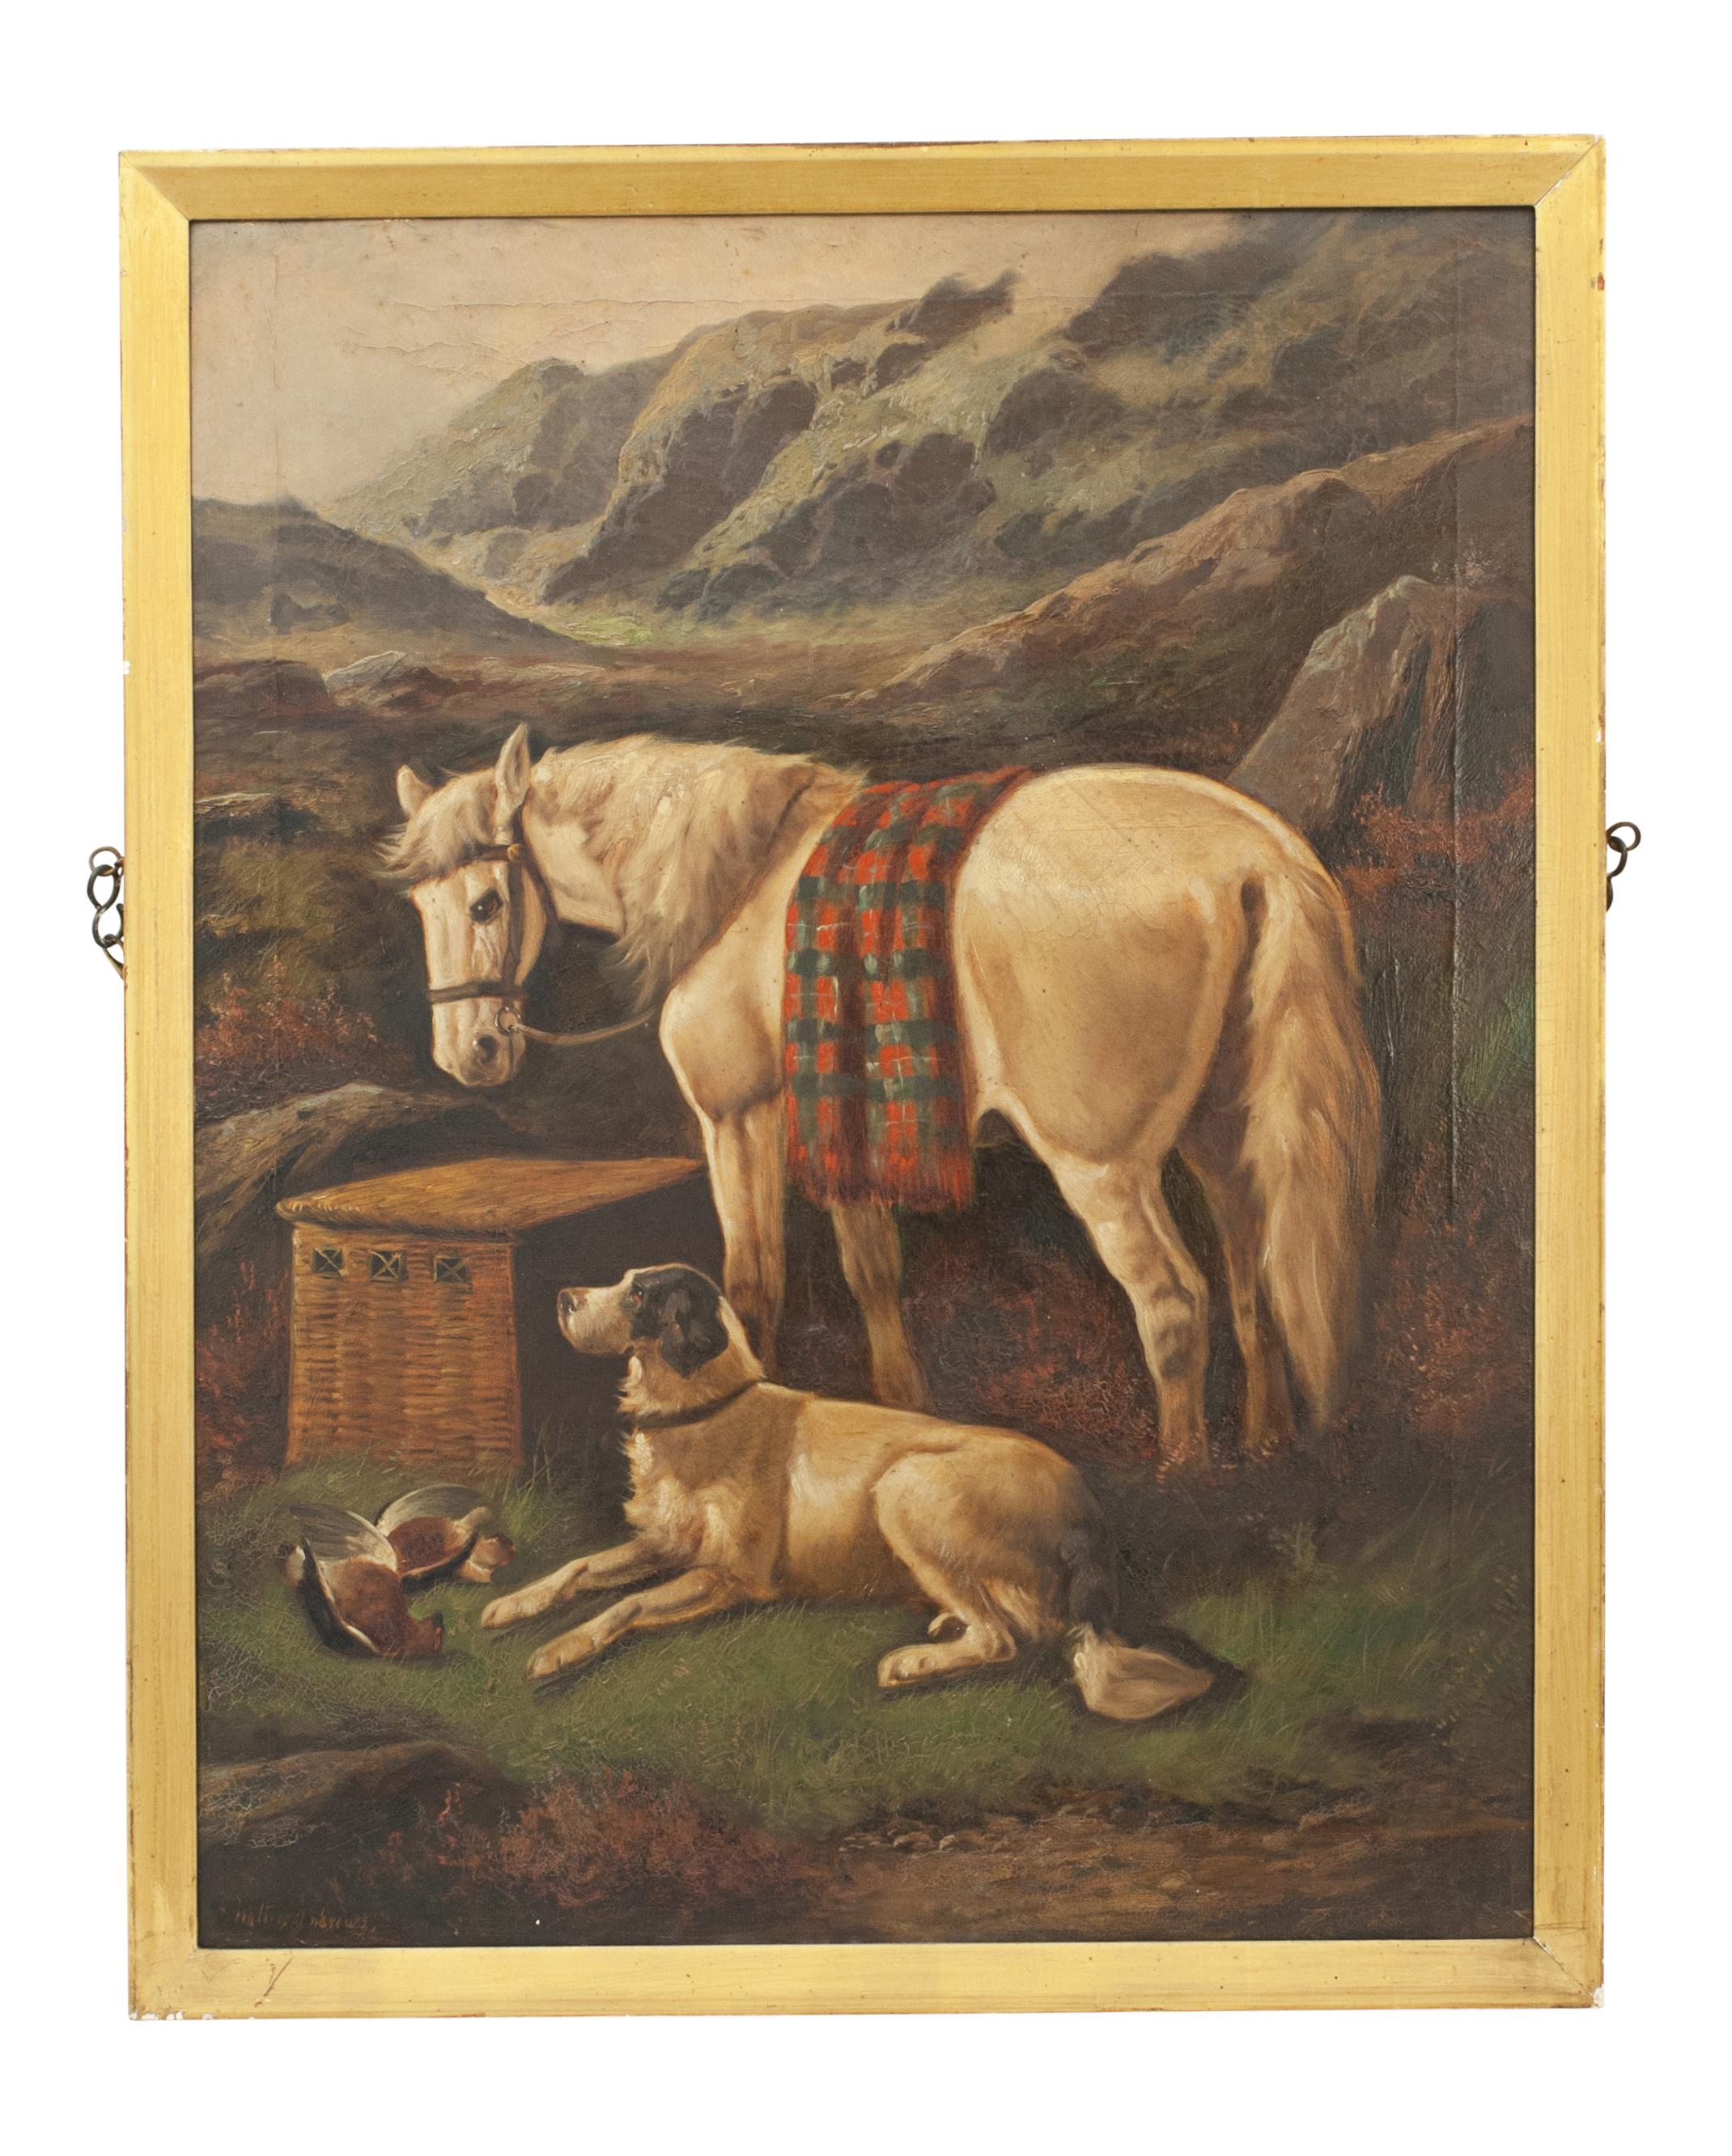 Pair of highland shooting oil paintings with gun dogs and ponies by Walter Andrews.
Stunning pair of oil on canvas highland shooting paintings in the style of John Morris. The paintings depict ponies, game, stag and hunting dogs in highland